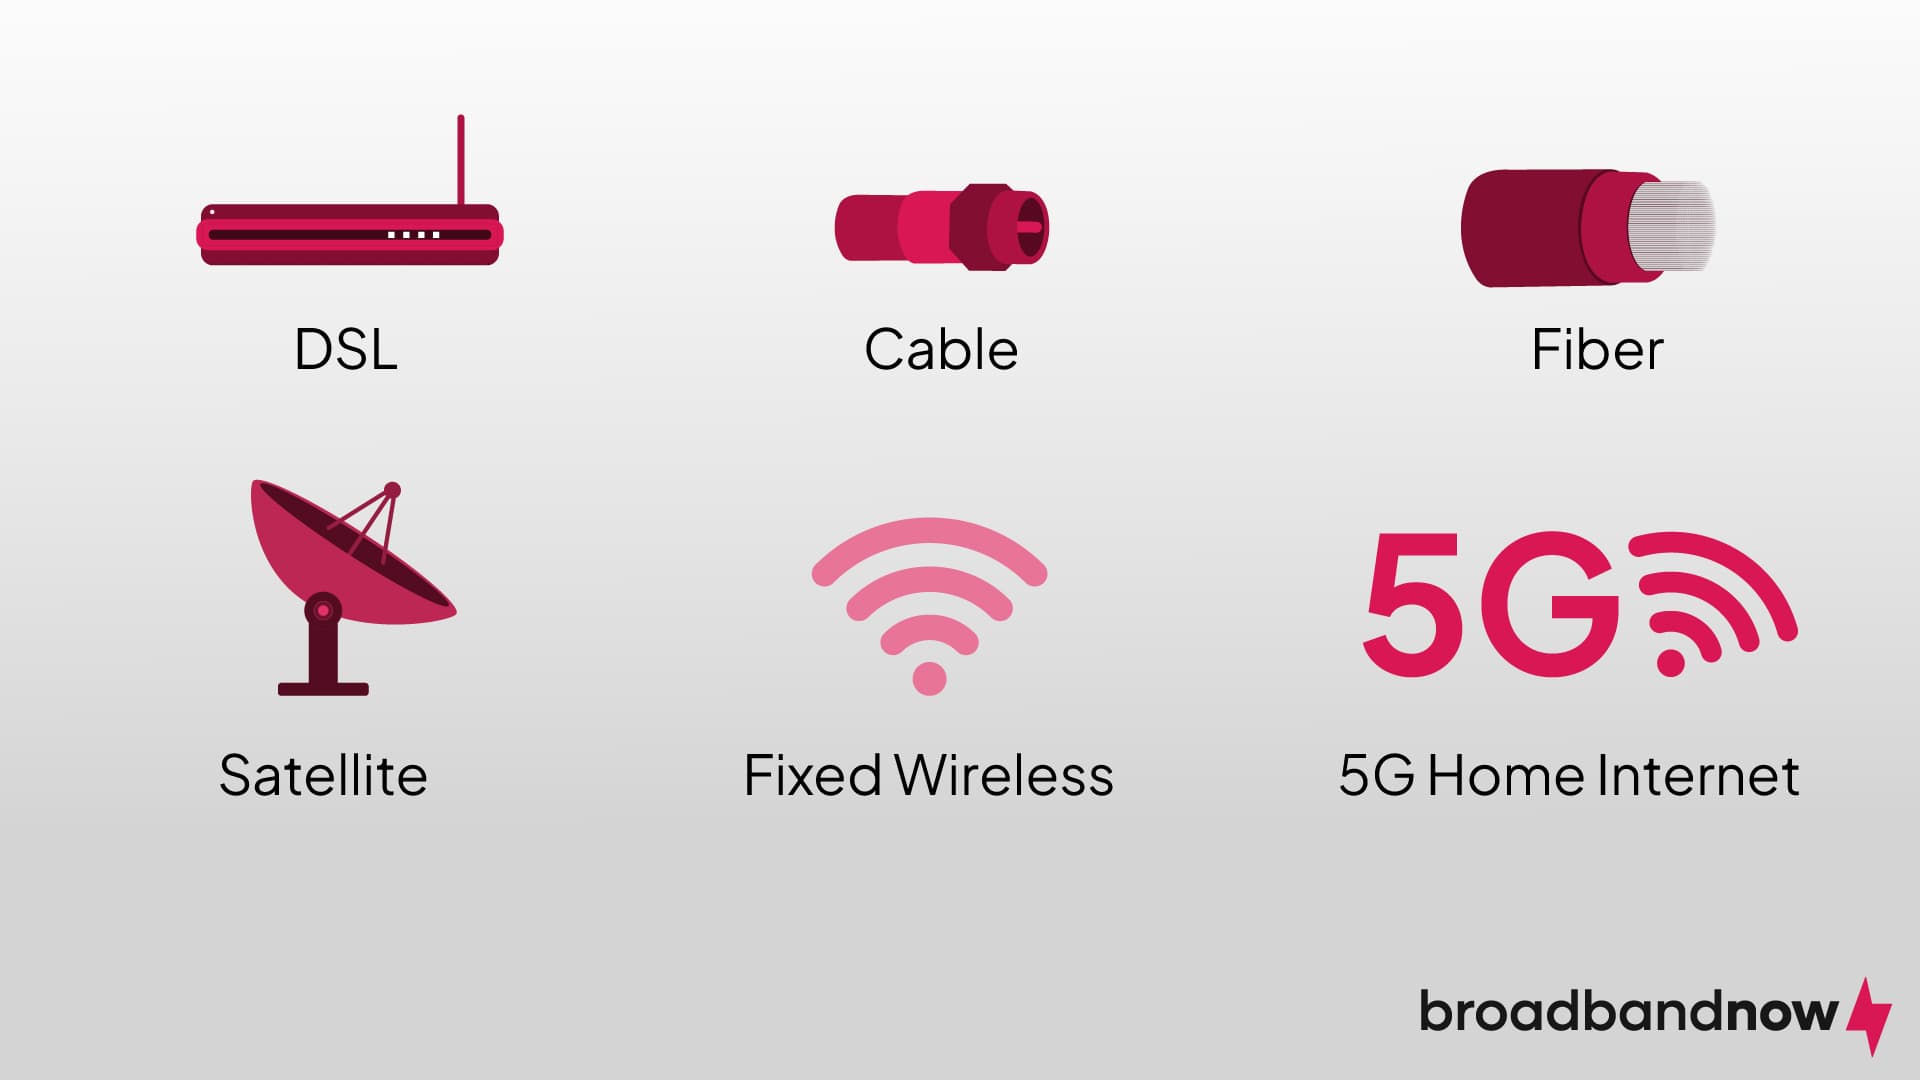 Diagram of the different types of broadband